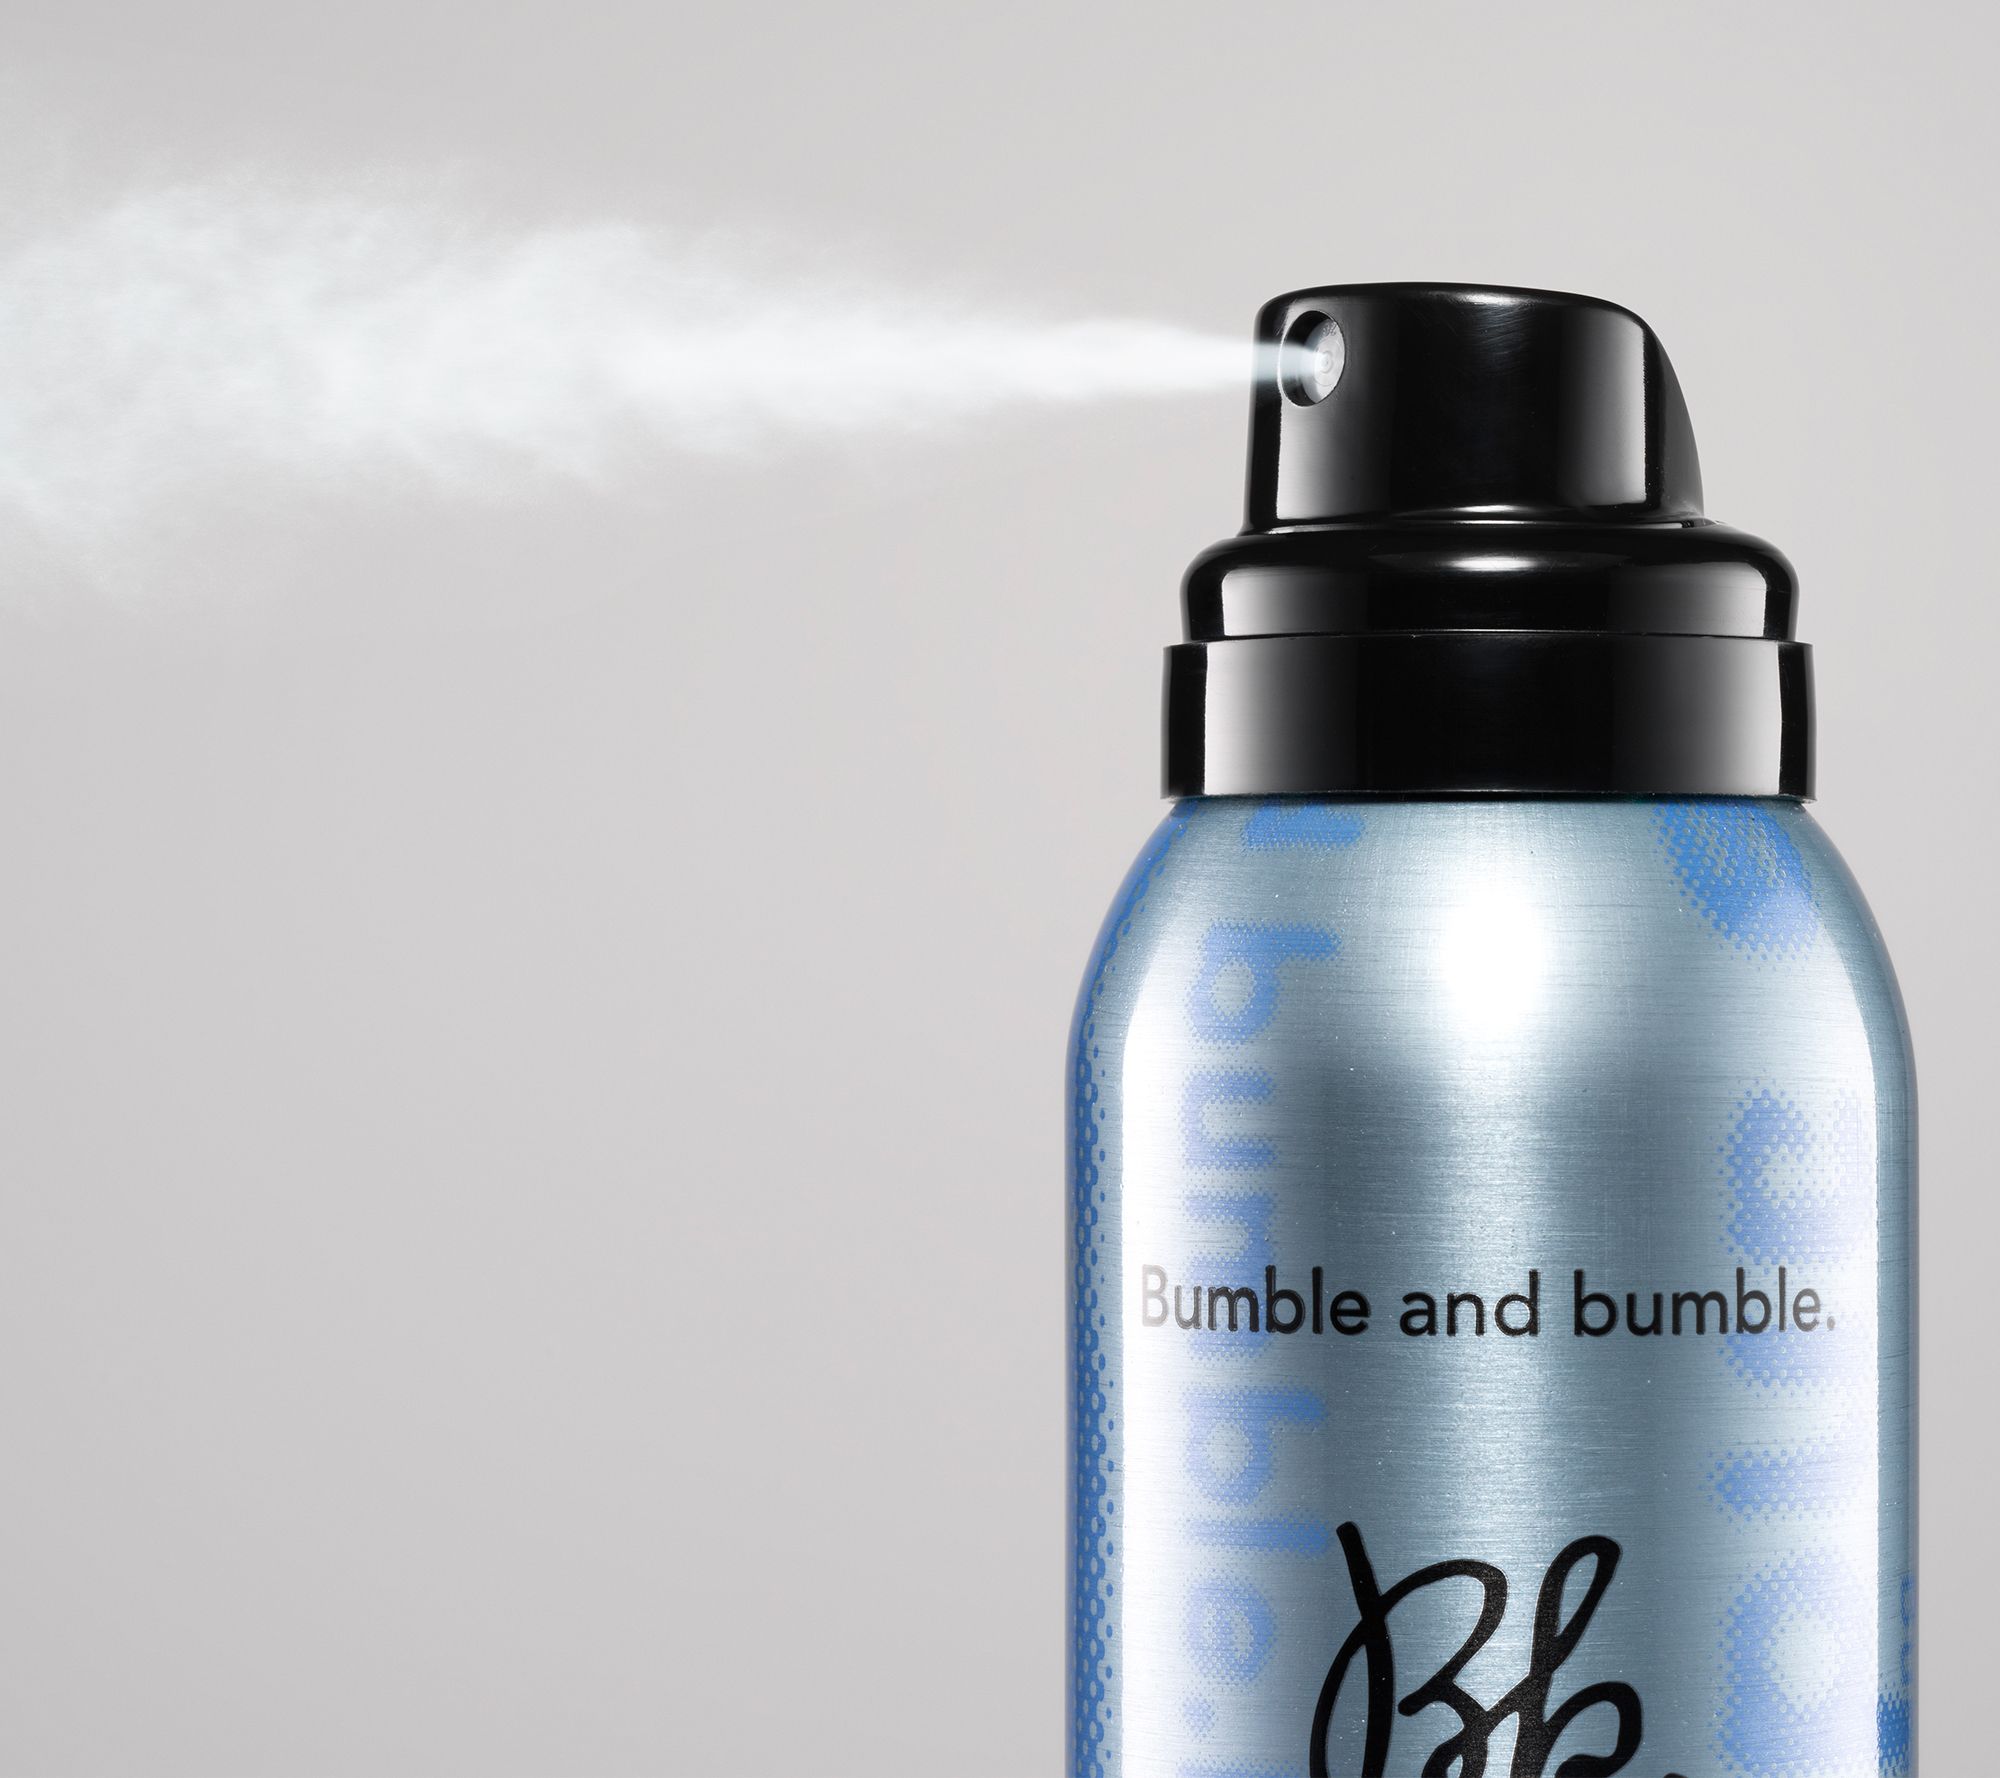 Bumble and bumble. Thickening Dry Spun Texture Spray Duo on QVC